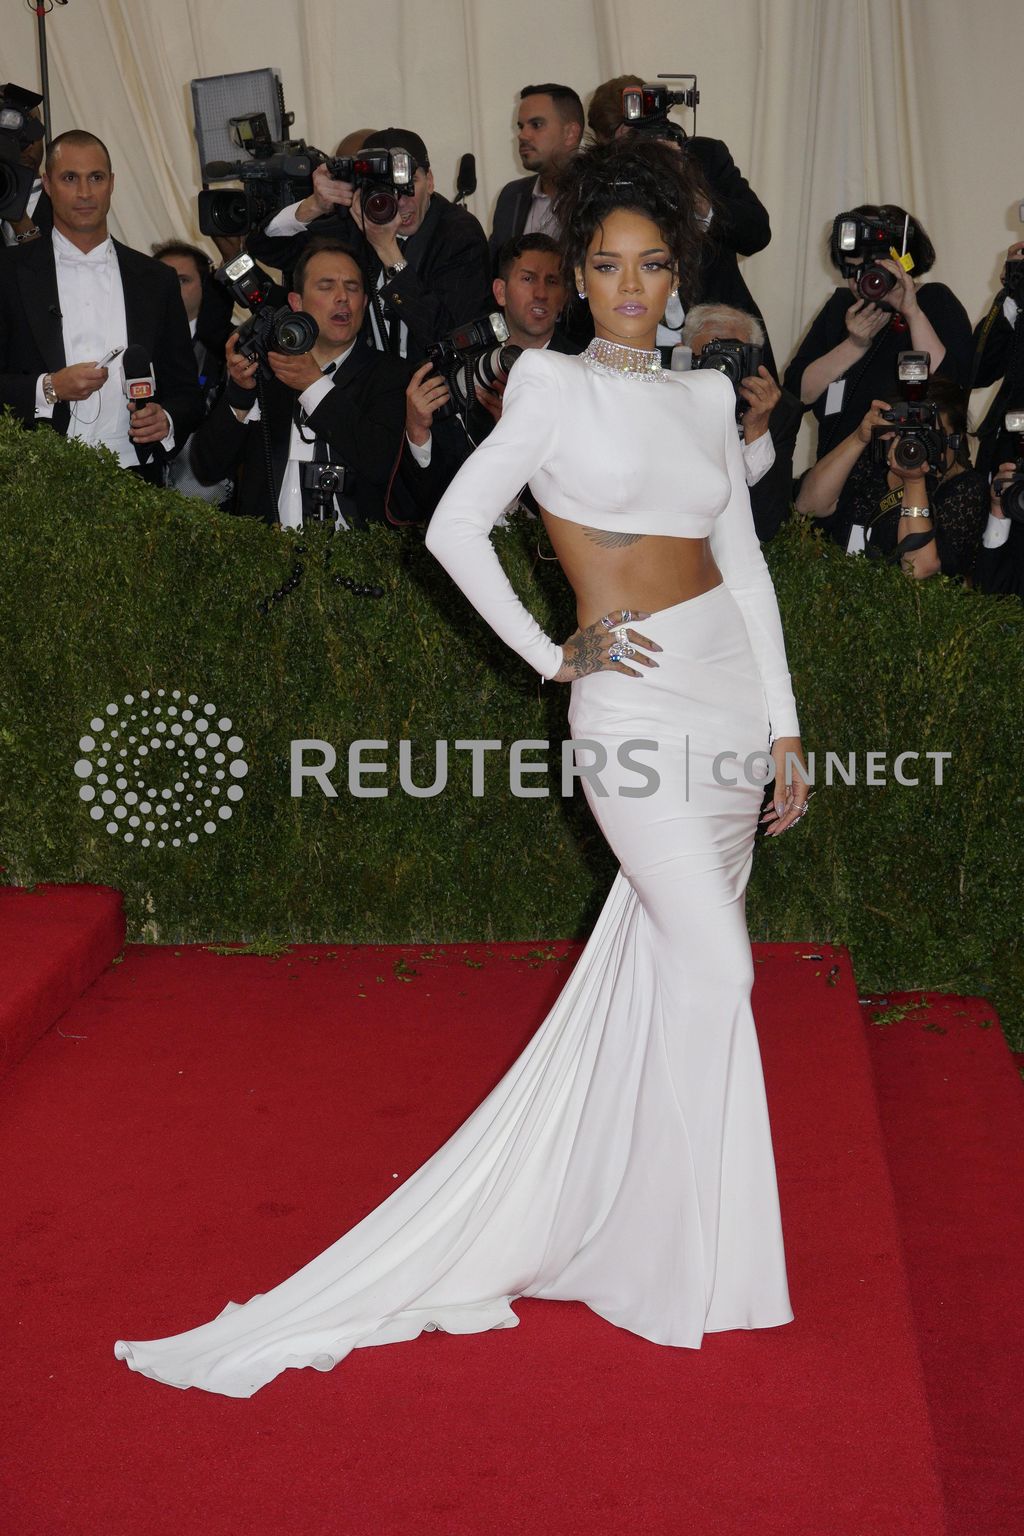 Rihanna arrives at the 2014 Costume Institute Benefit at The Metropolitan Museum of Art on May 5, 2014 in New York, New York. Francis Specker /Landov